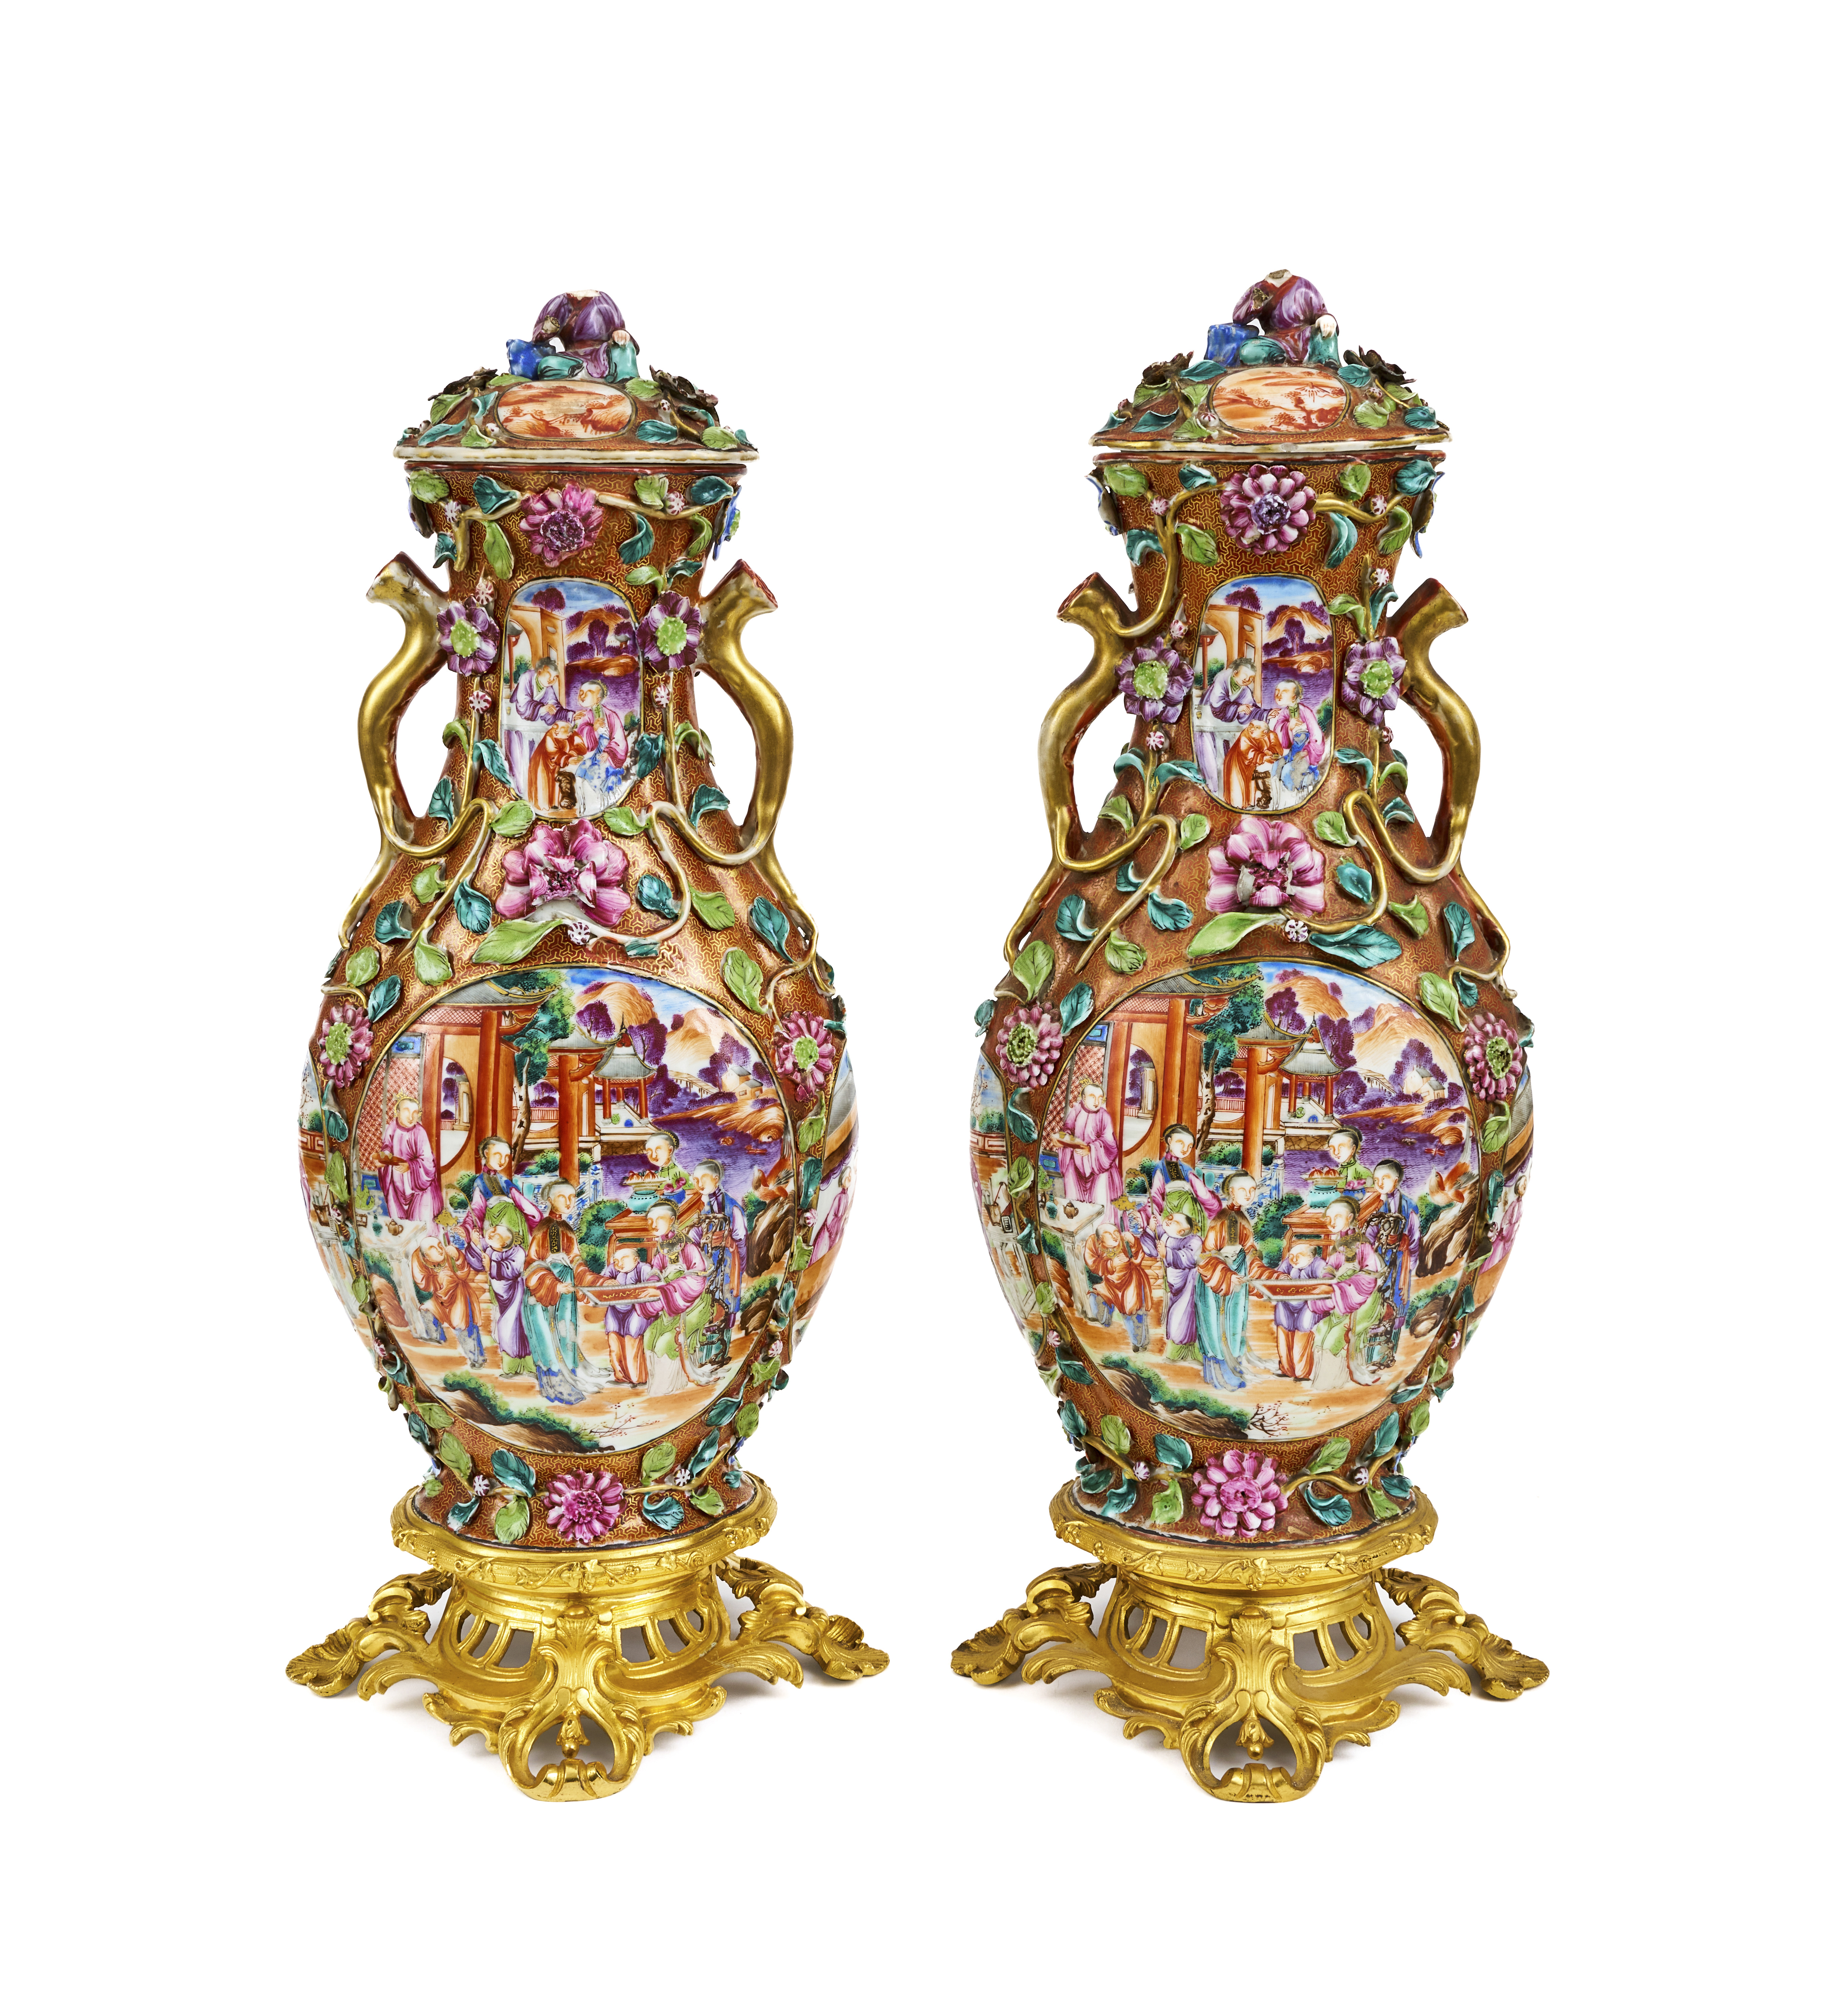 A PAIR OF CHINESE FAMILLE ROSE VASES WITH FRENCH MOUNTS, QIANLONG PERIOD (1736-1795)